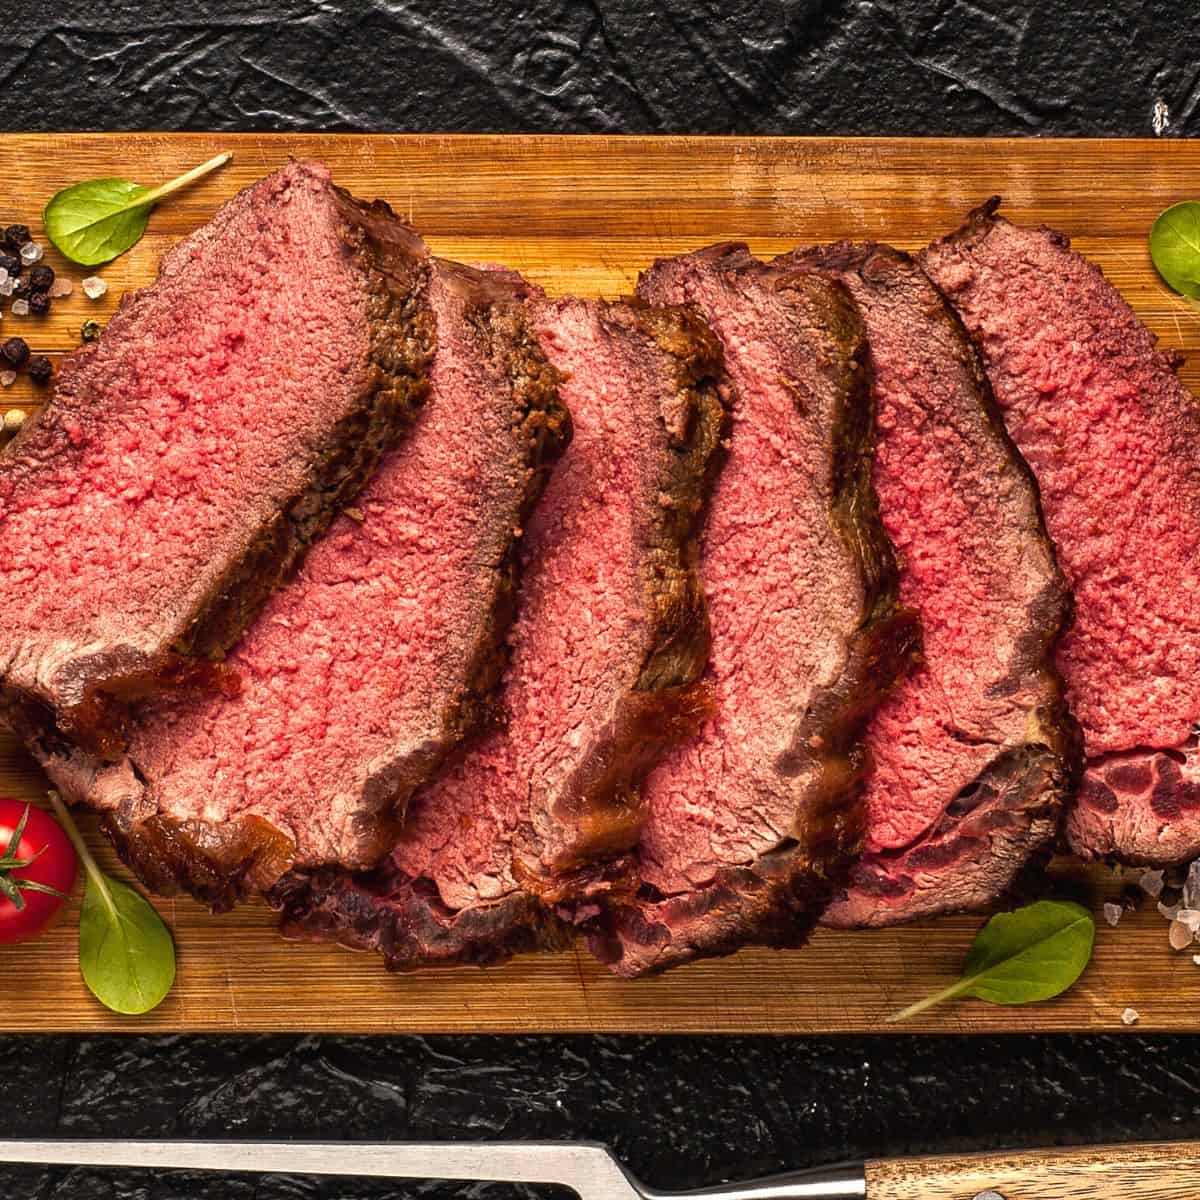 What Are the Best Meats You Can Add to Your Keto Diet